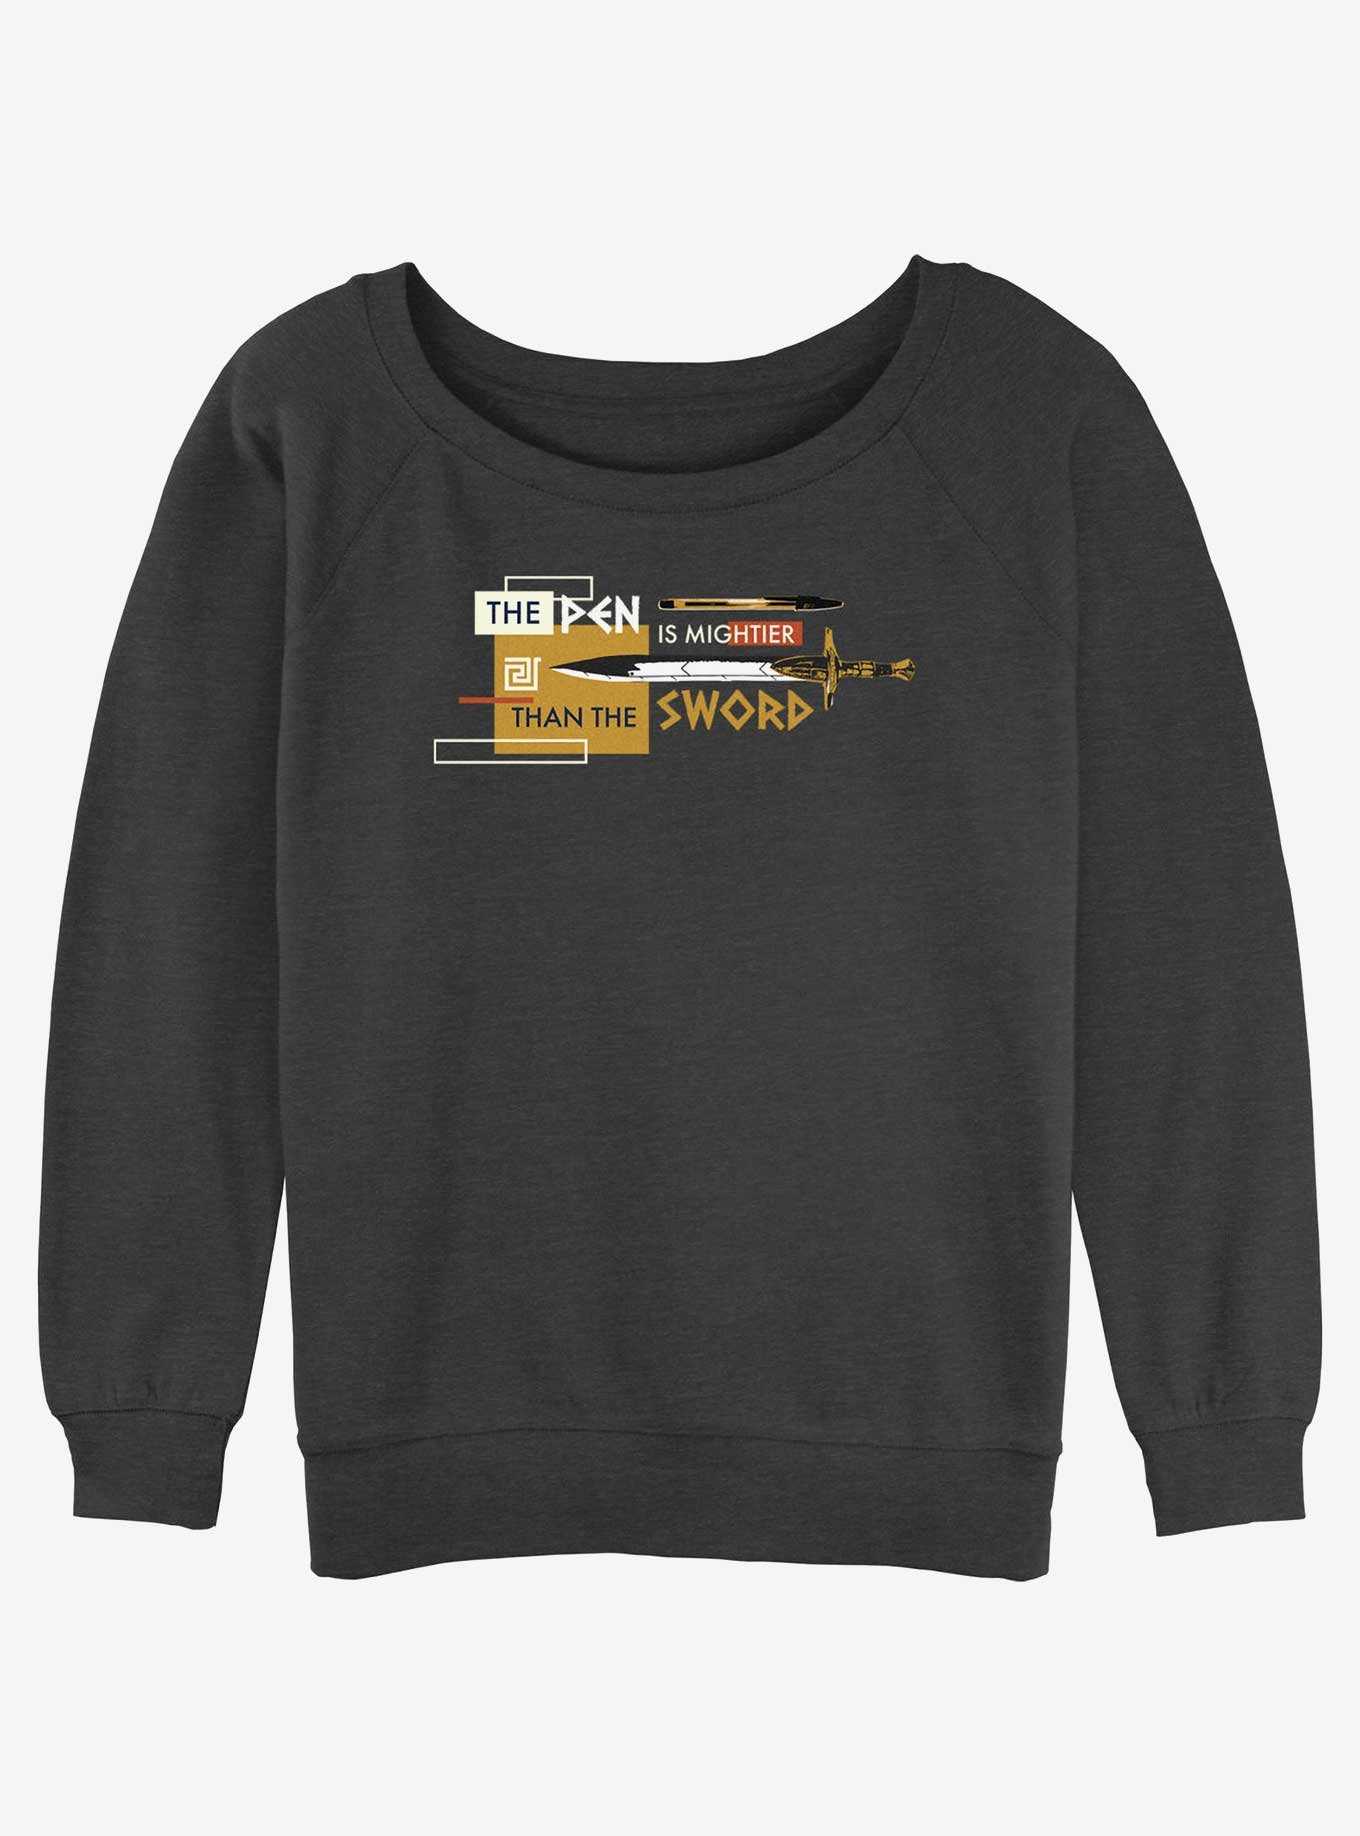 Disney Percy Jackson And The Olympians The Pen Is Mightier Than The Sword Girls Slouchy Sweatshirt, , hi-res